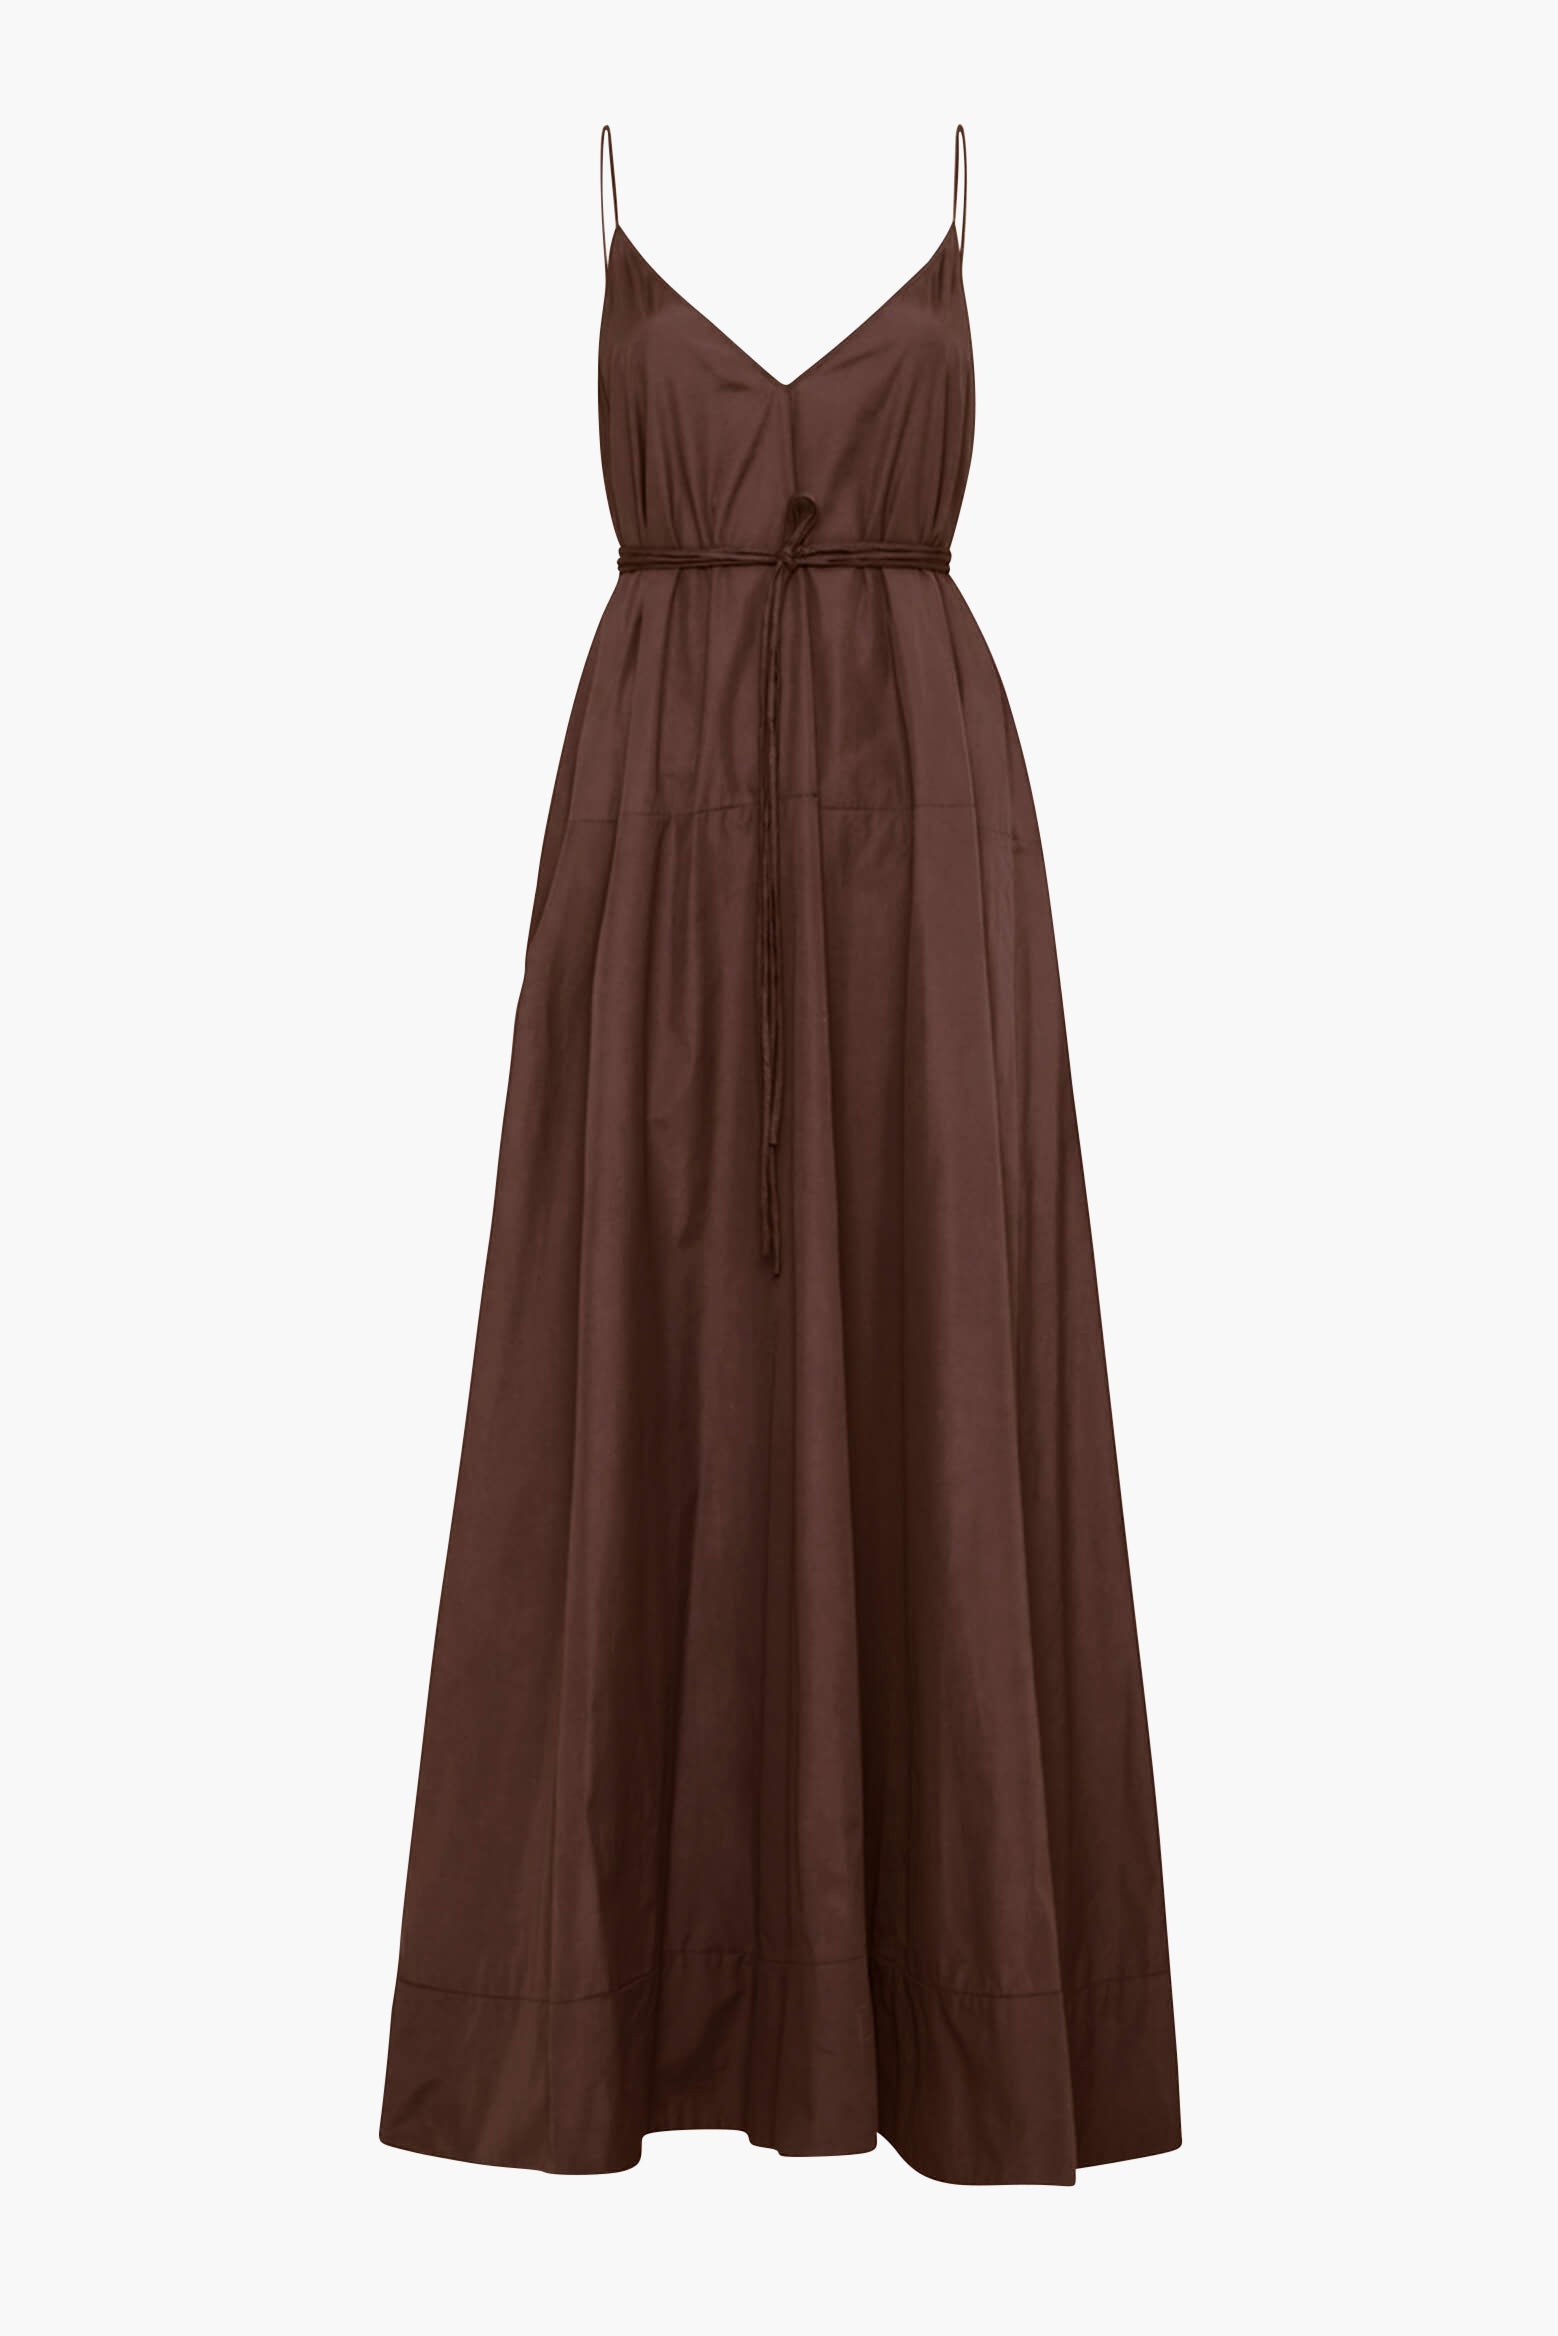 Esse Silk Strap V Maxi Dress in Chocolate available at The New Trend